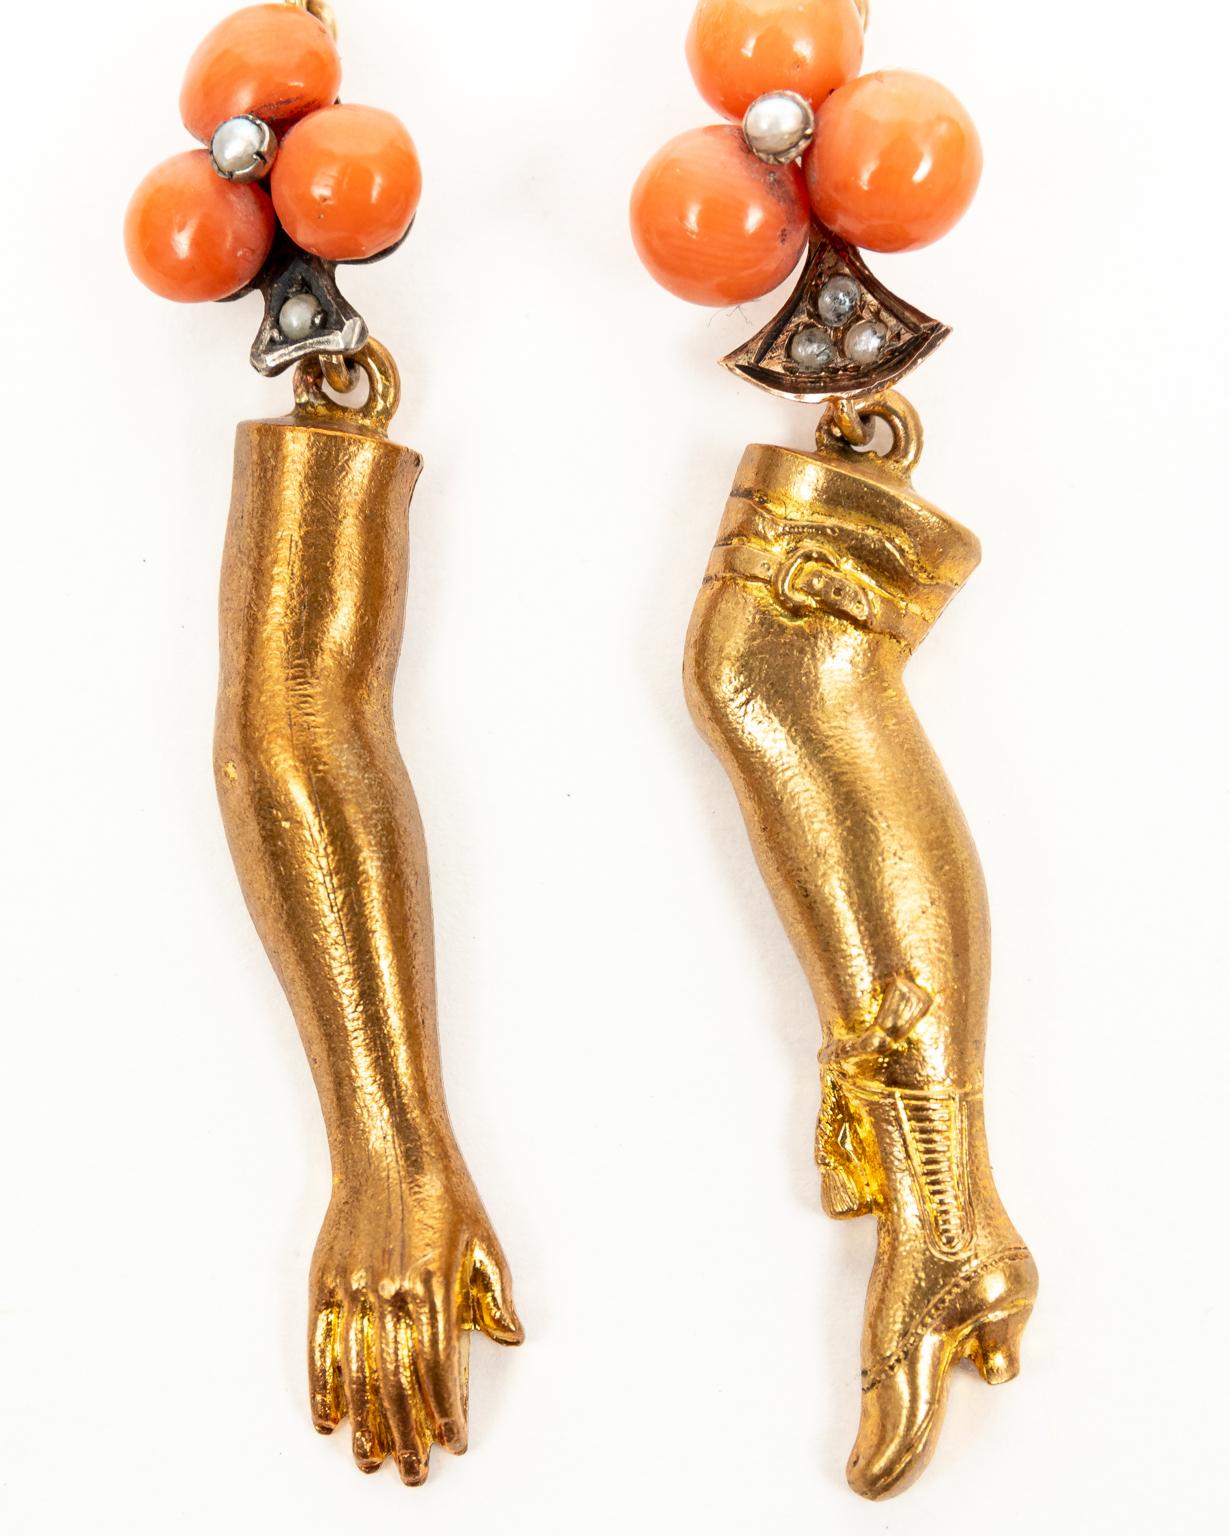 Cabochon Pair of Vermeil Arm and Leg Earrings Titled 